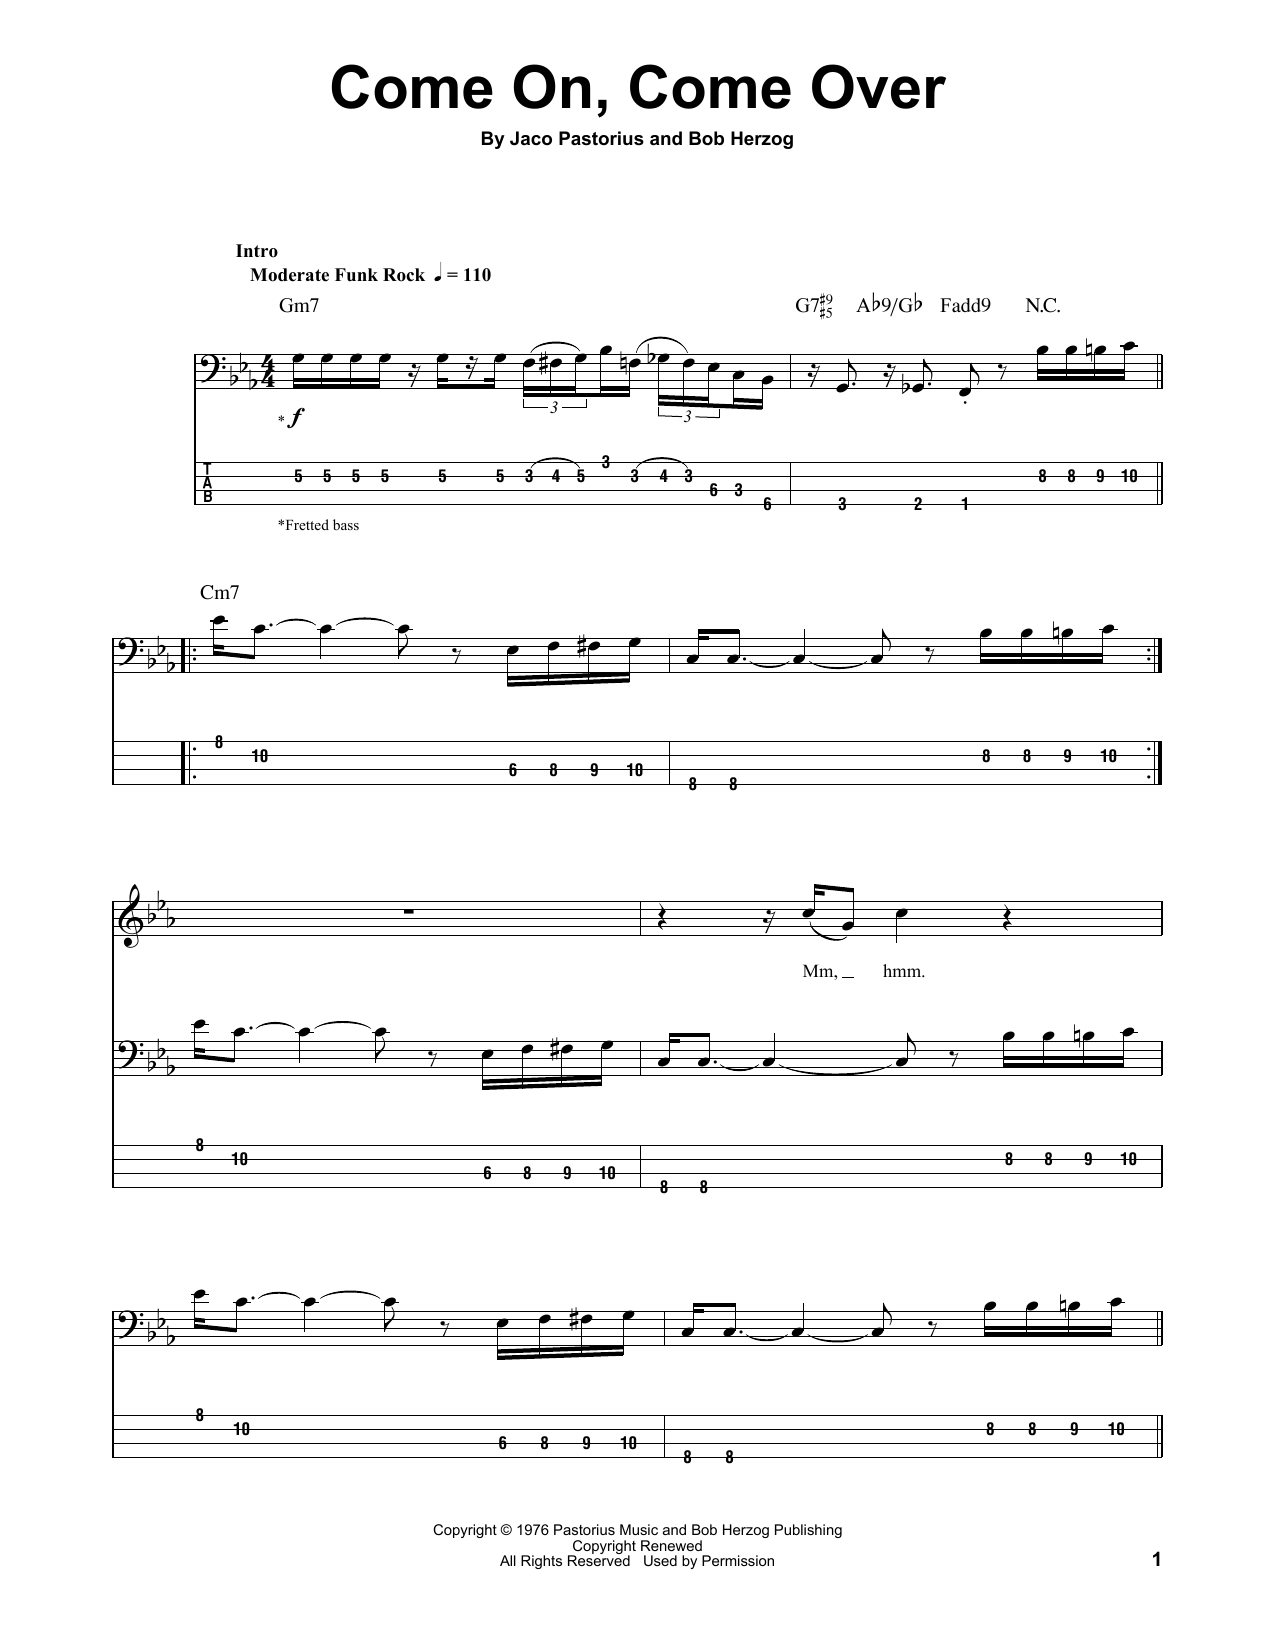 Download Jaco Pastorius Come On, Come Over Sheet Music